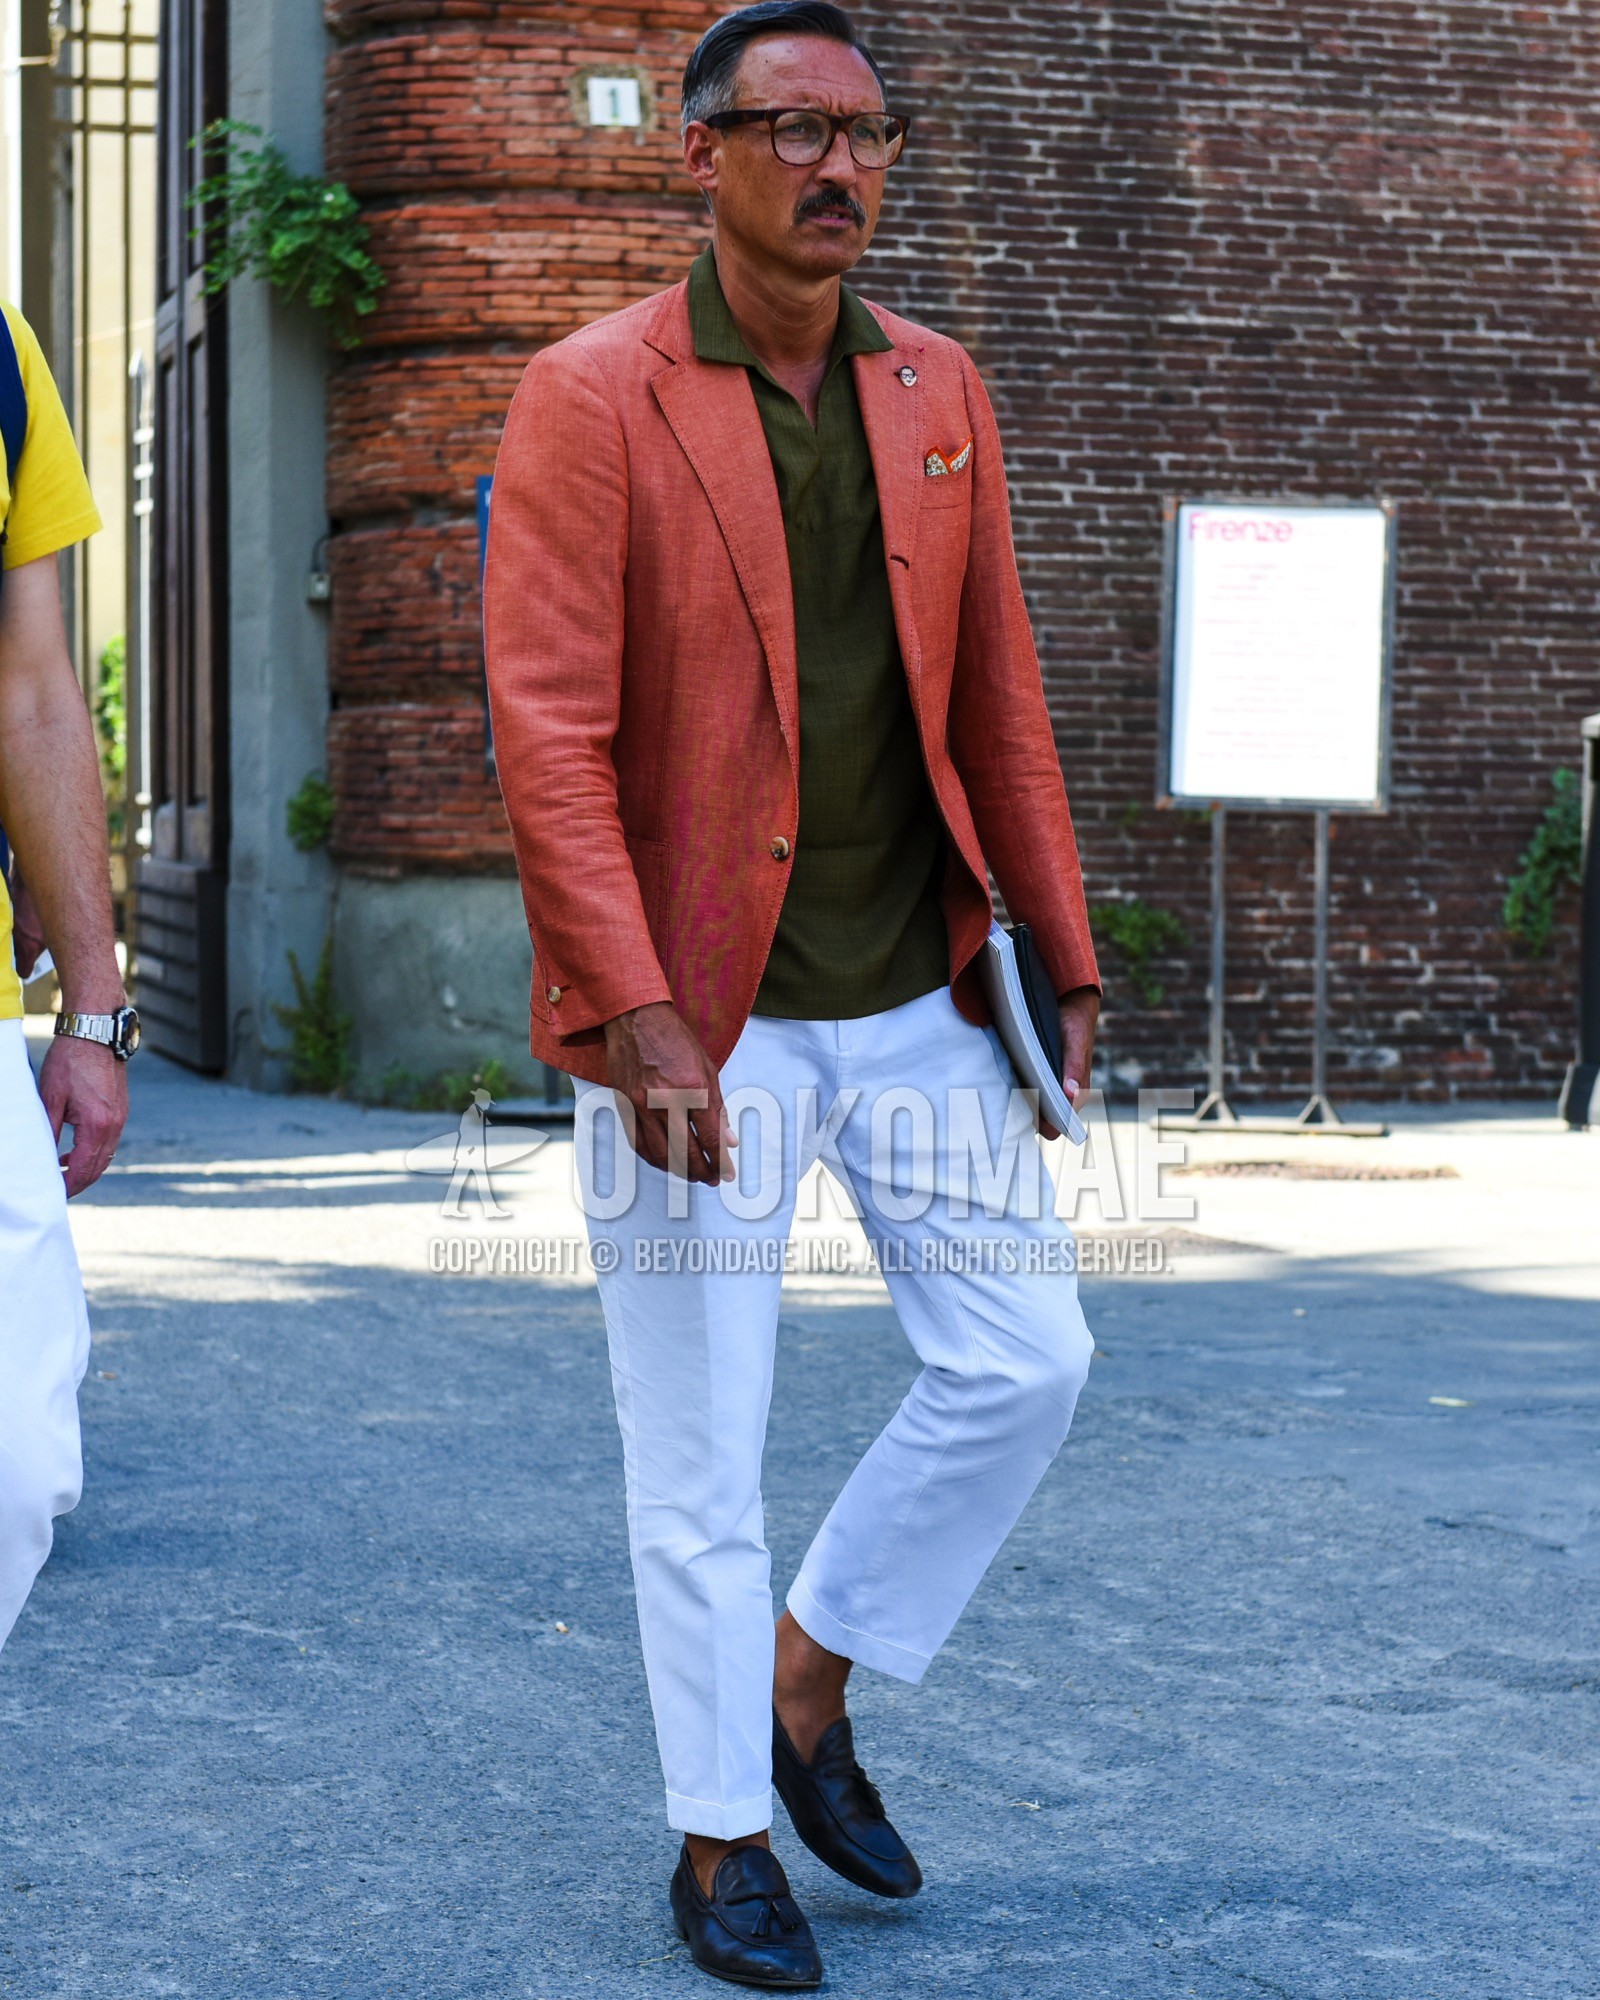 Men's spring summer outfit with brown tortoiseshell glasses, red plain tailored jacket, olive green plain polo shirt, white plain cotton pants, black tassel loafers leather shoes.